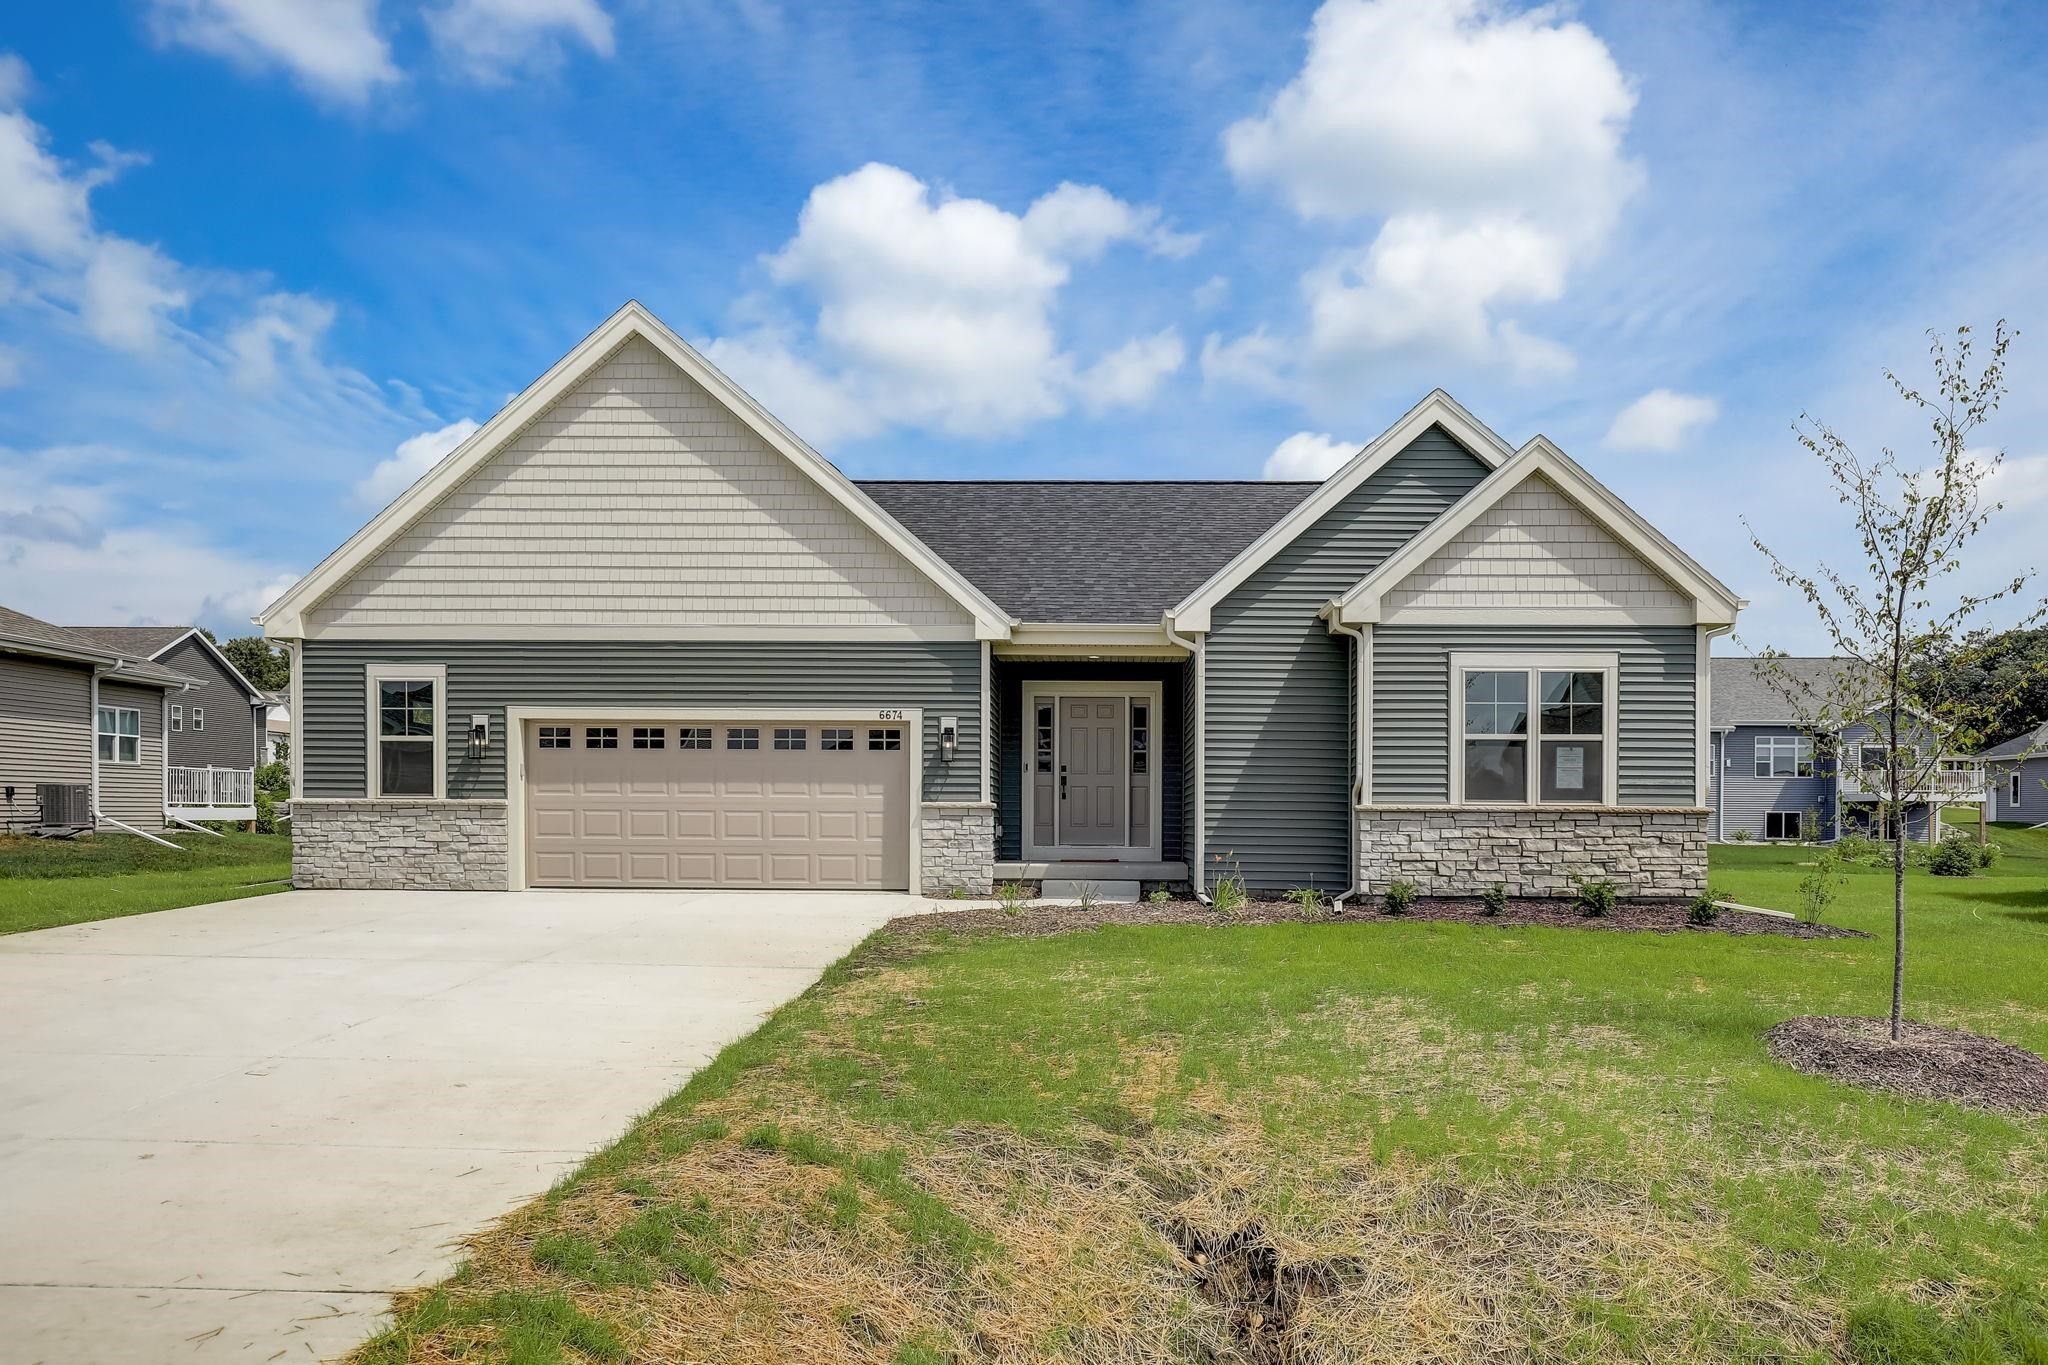 6674 Grouse Woods Road. DeForest, WI 53532